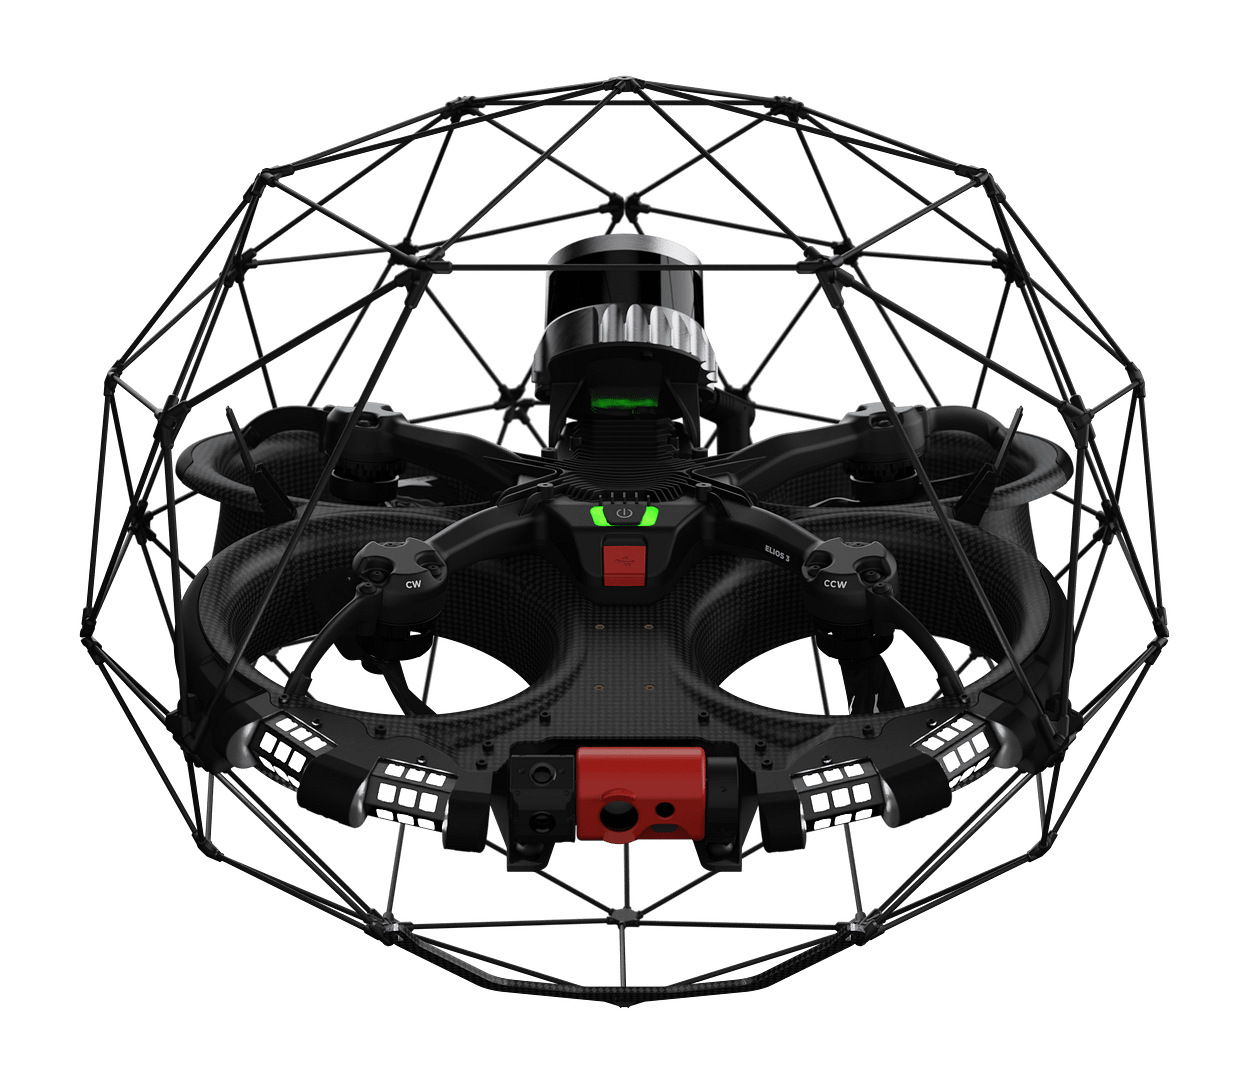 Elios 3 drone surveying solution powered by Flyability and GeoSLAM